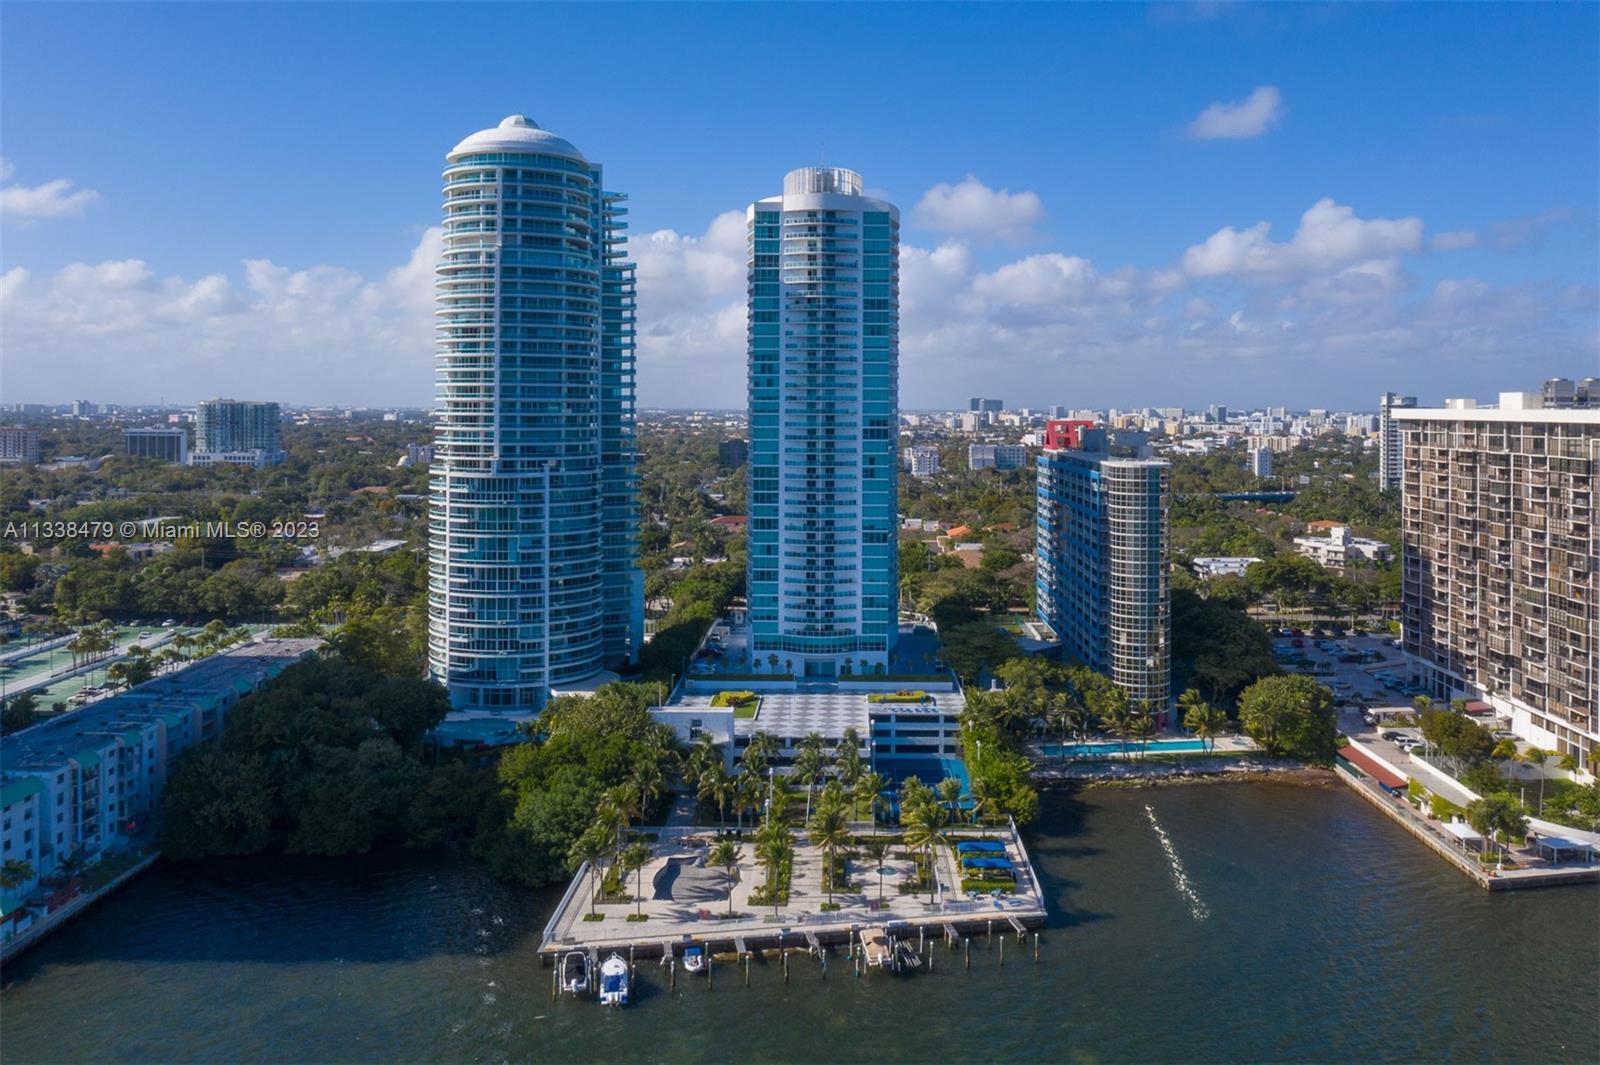 Great 1 bedroom apartment in the sought-after Skyline on Brickell! Unit features brand-new, stainles